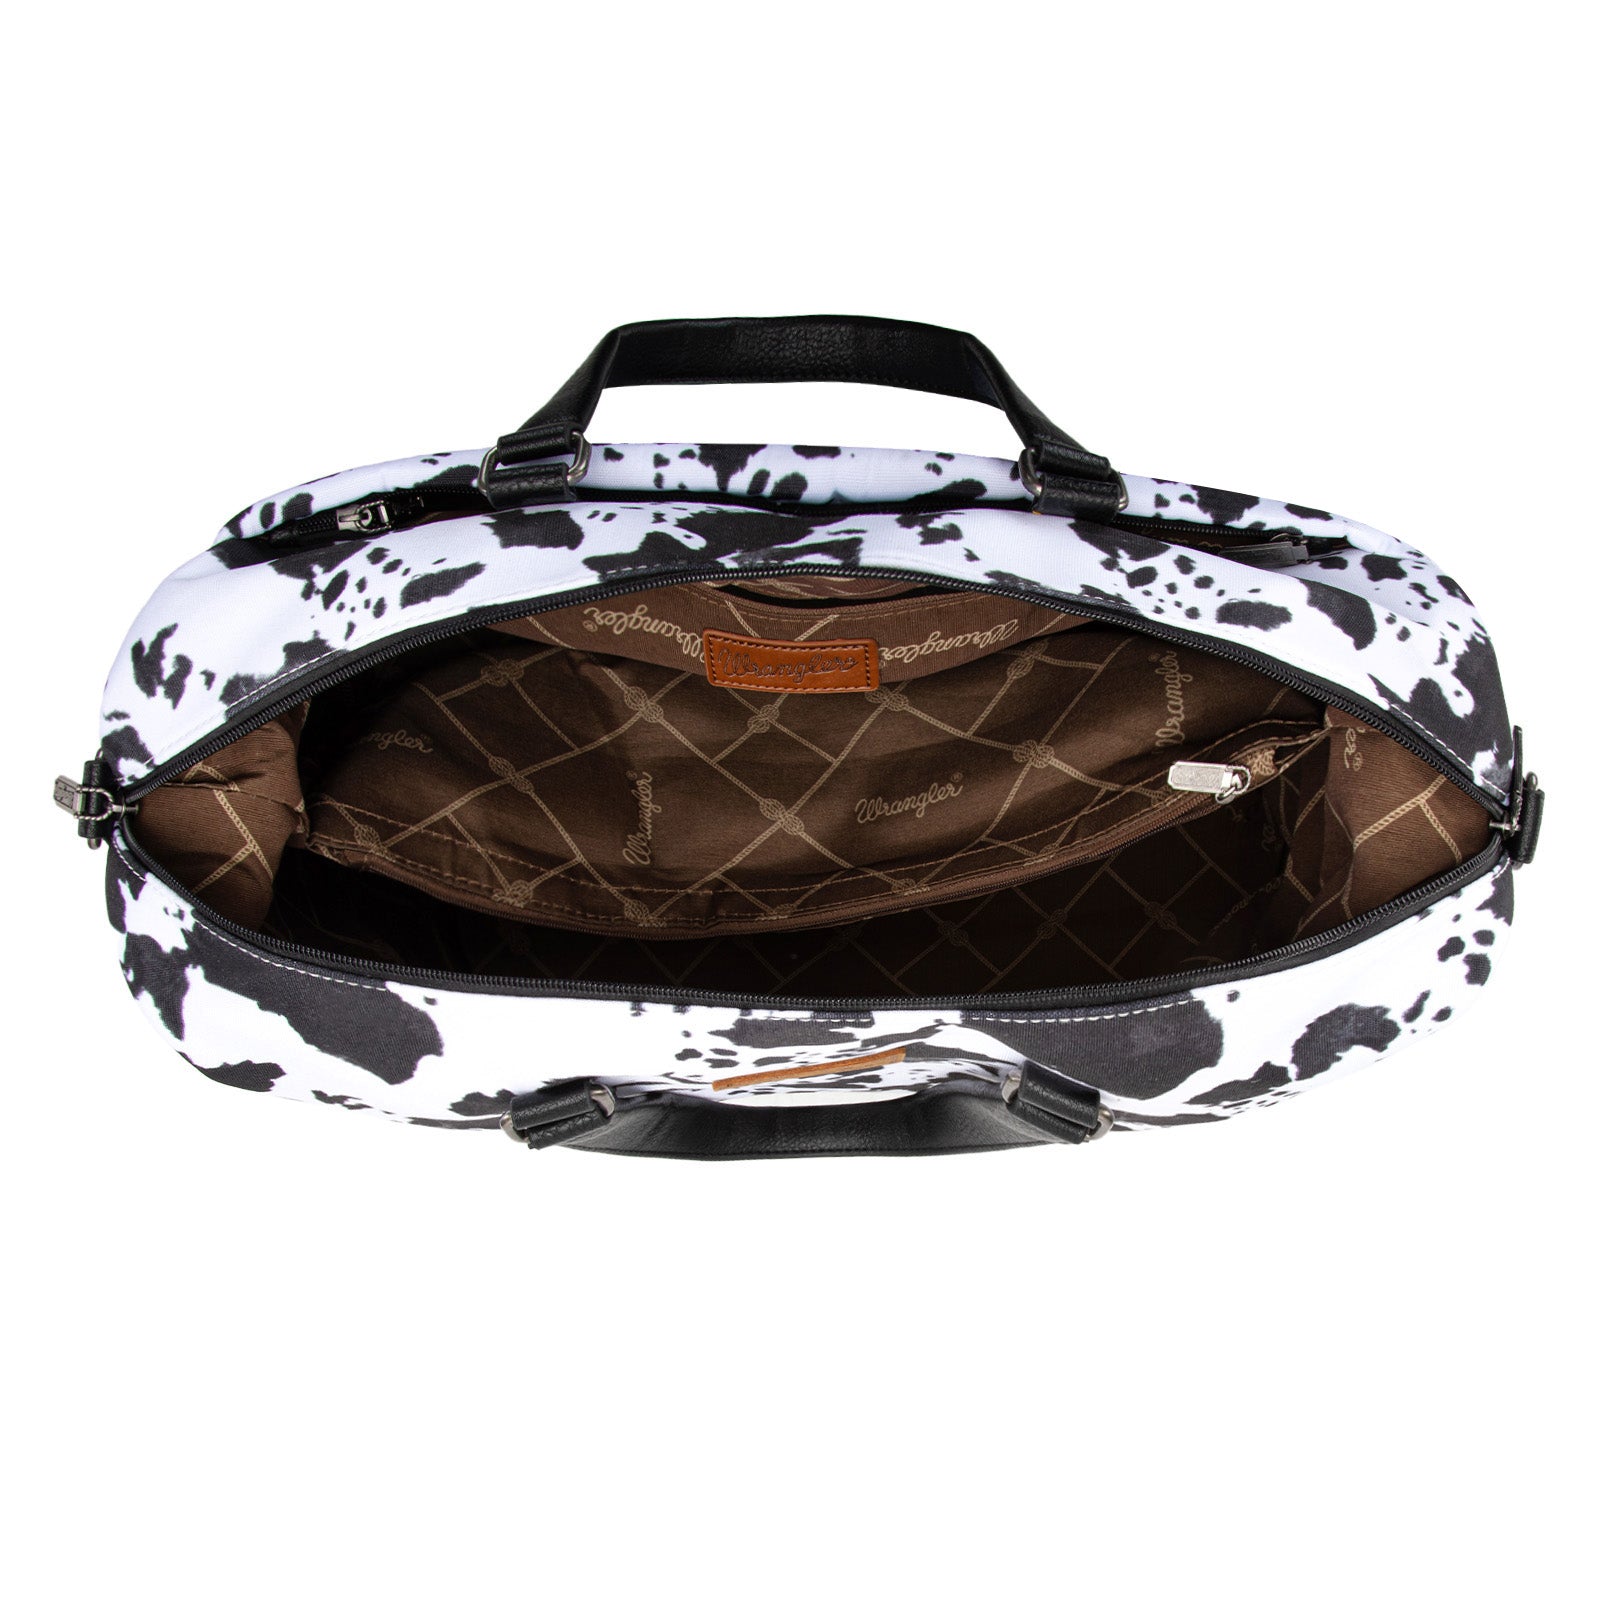 Wrangler Cow Print Trolley Sleeve Collection